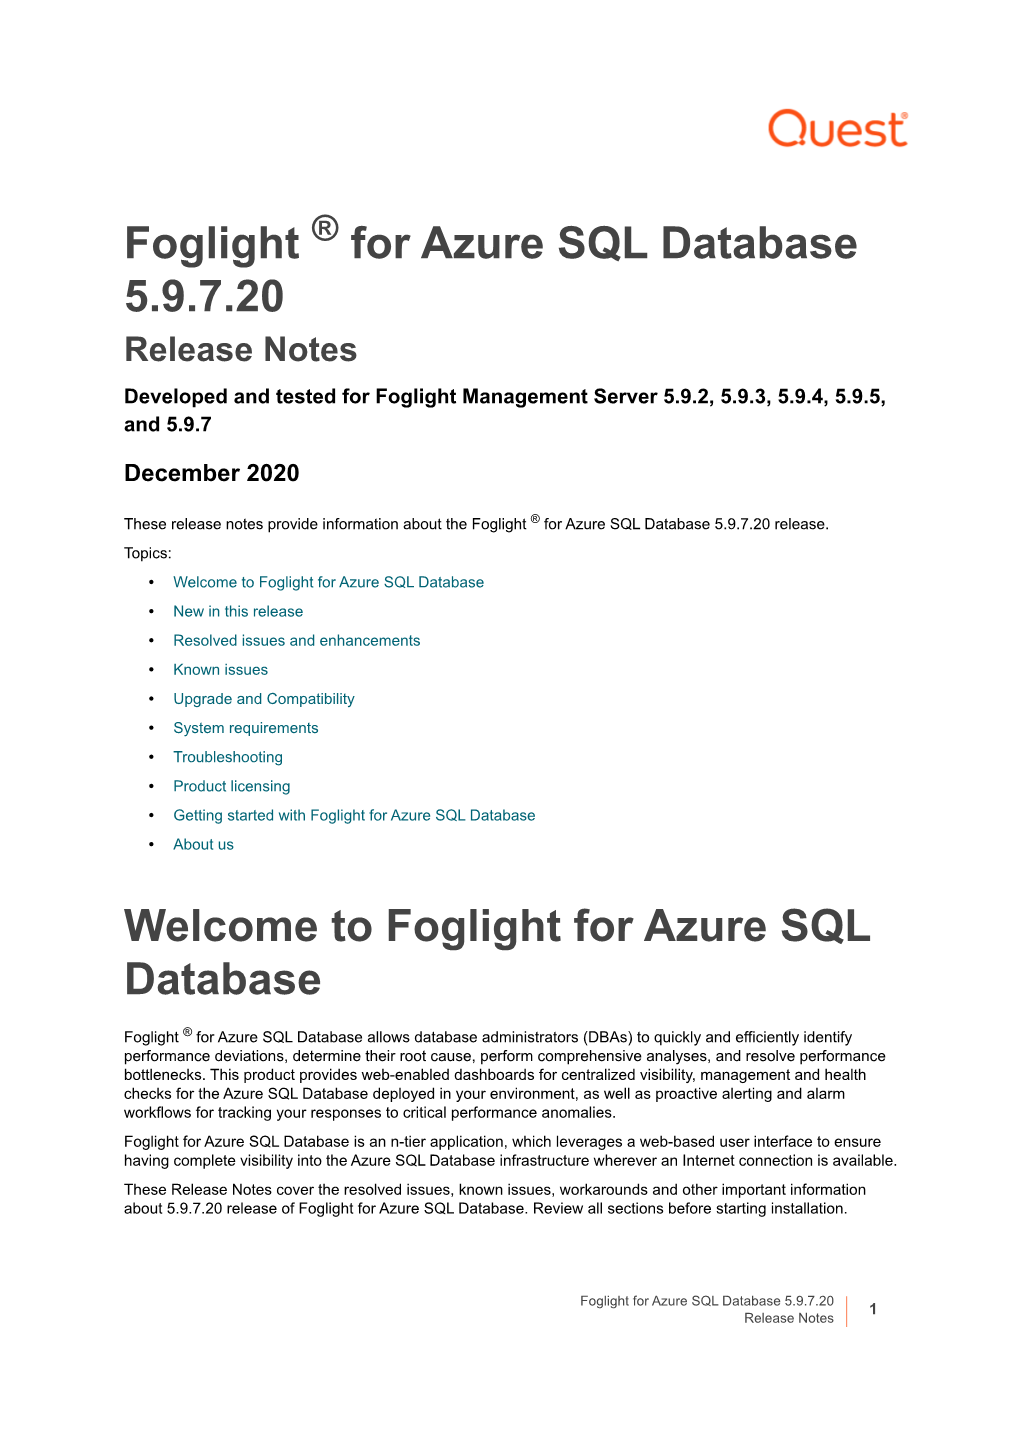 For Azure SQL Database 5.9.7.20 Release Notes Developed and Tested for Foglight Management Server 5.9.2, 5.9.3, 5.9.4, 5.9.5, and 5.9.7